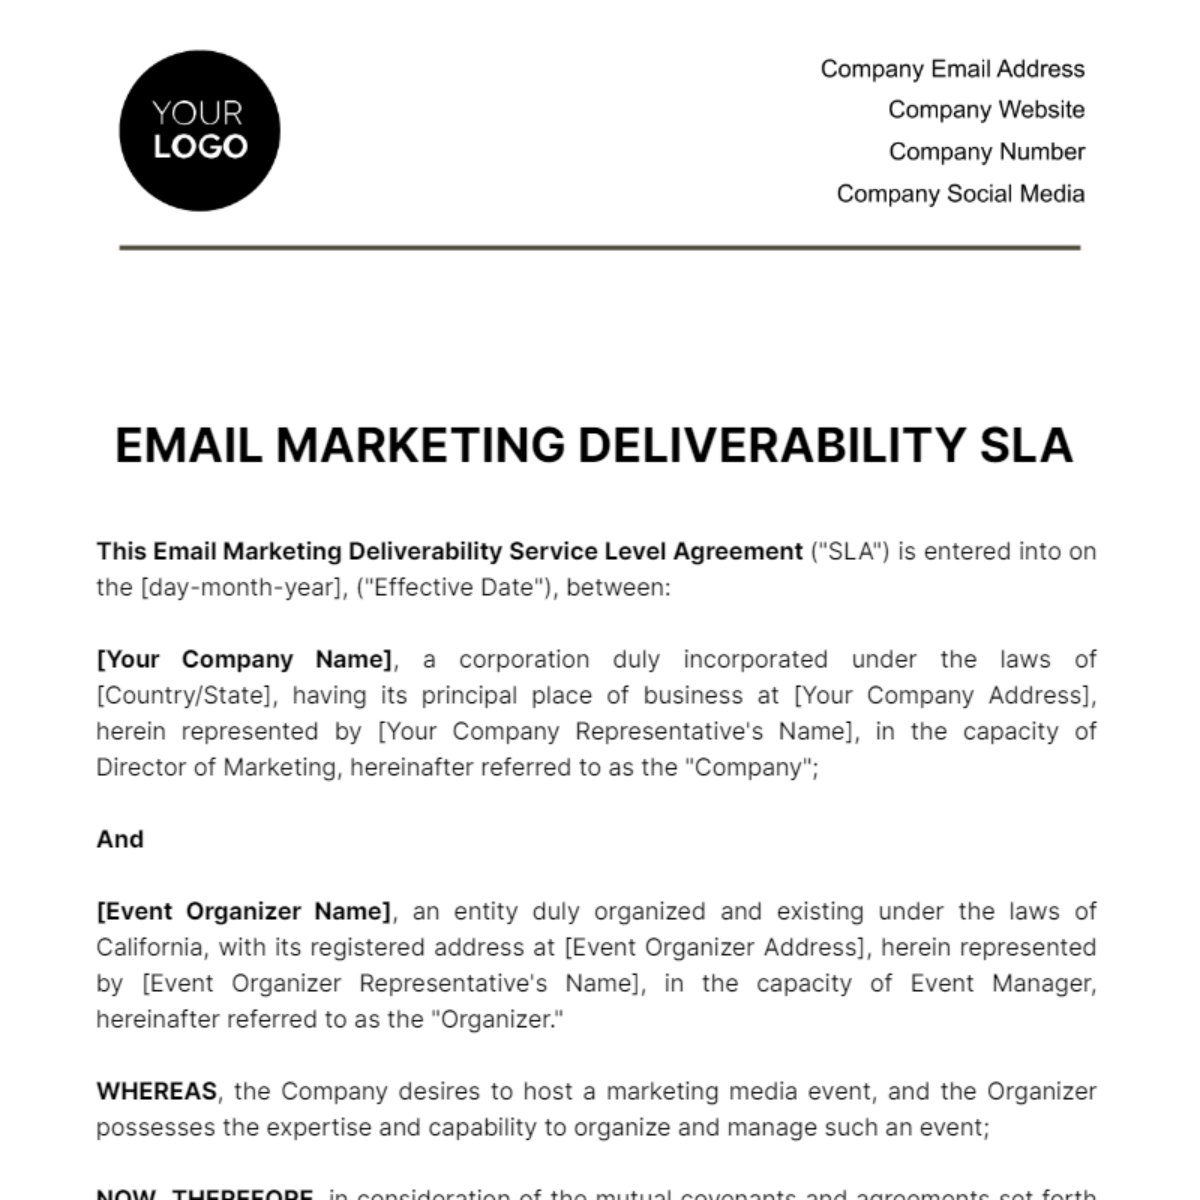 Free Email Marketing Deliverability SLA Template